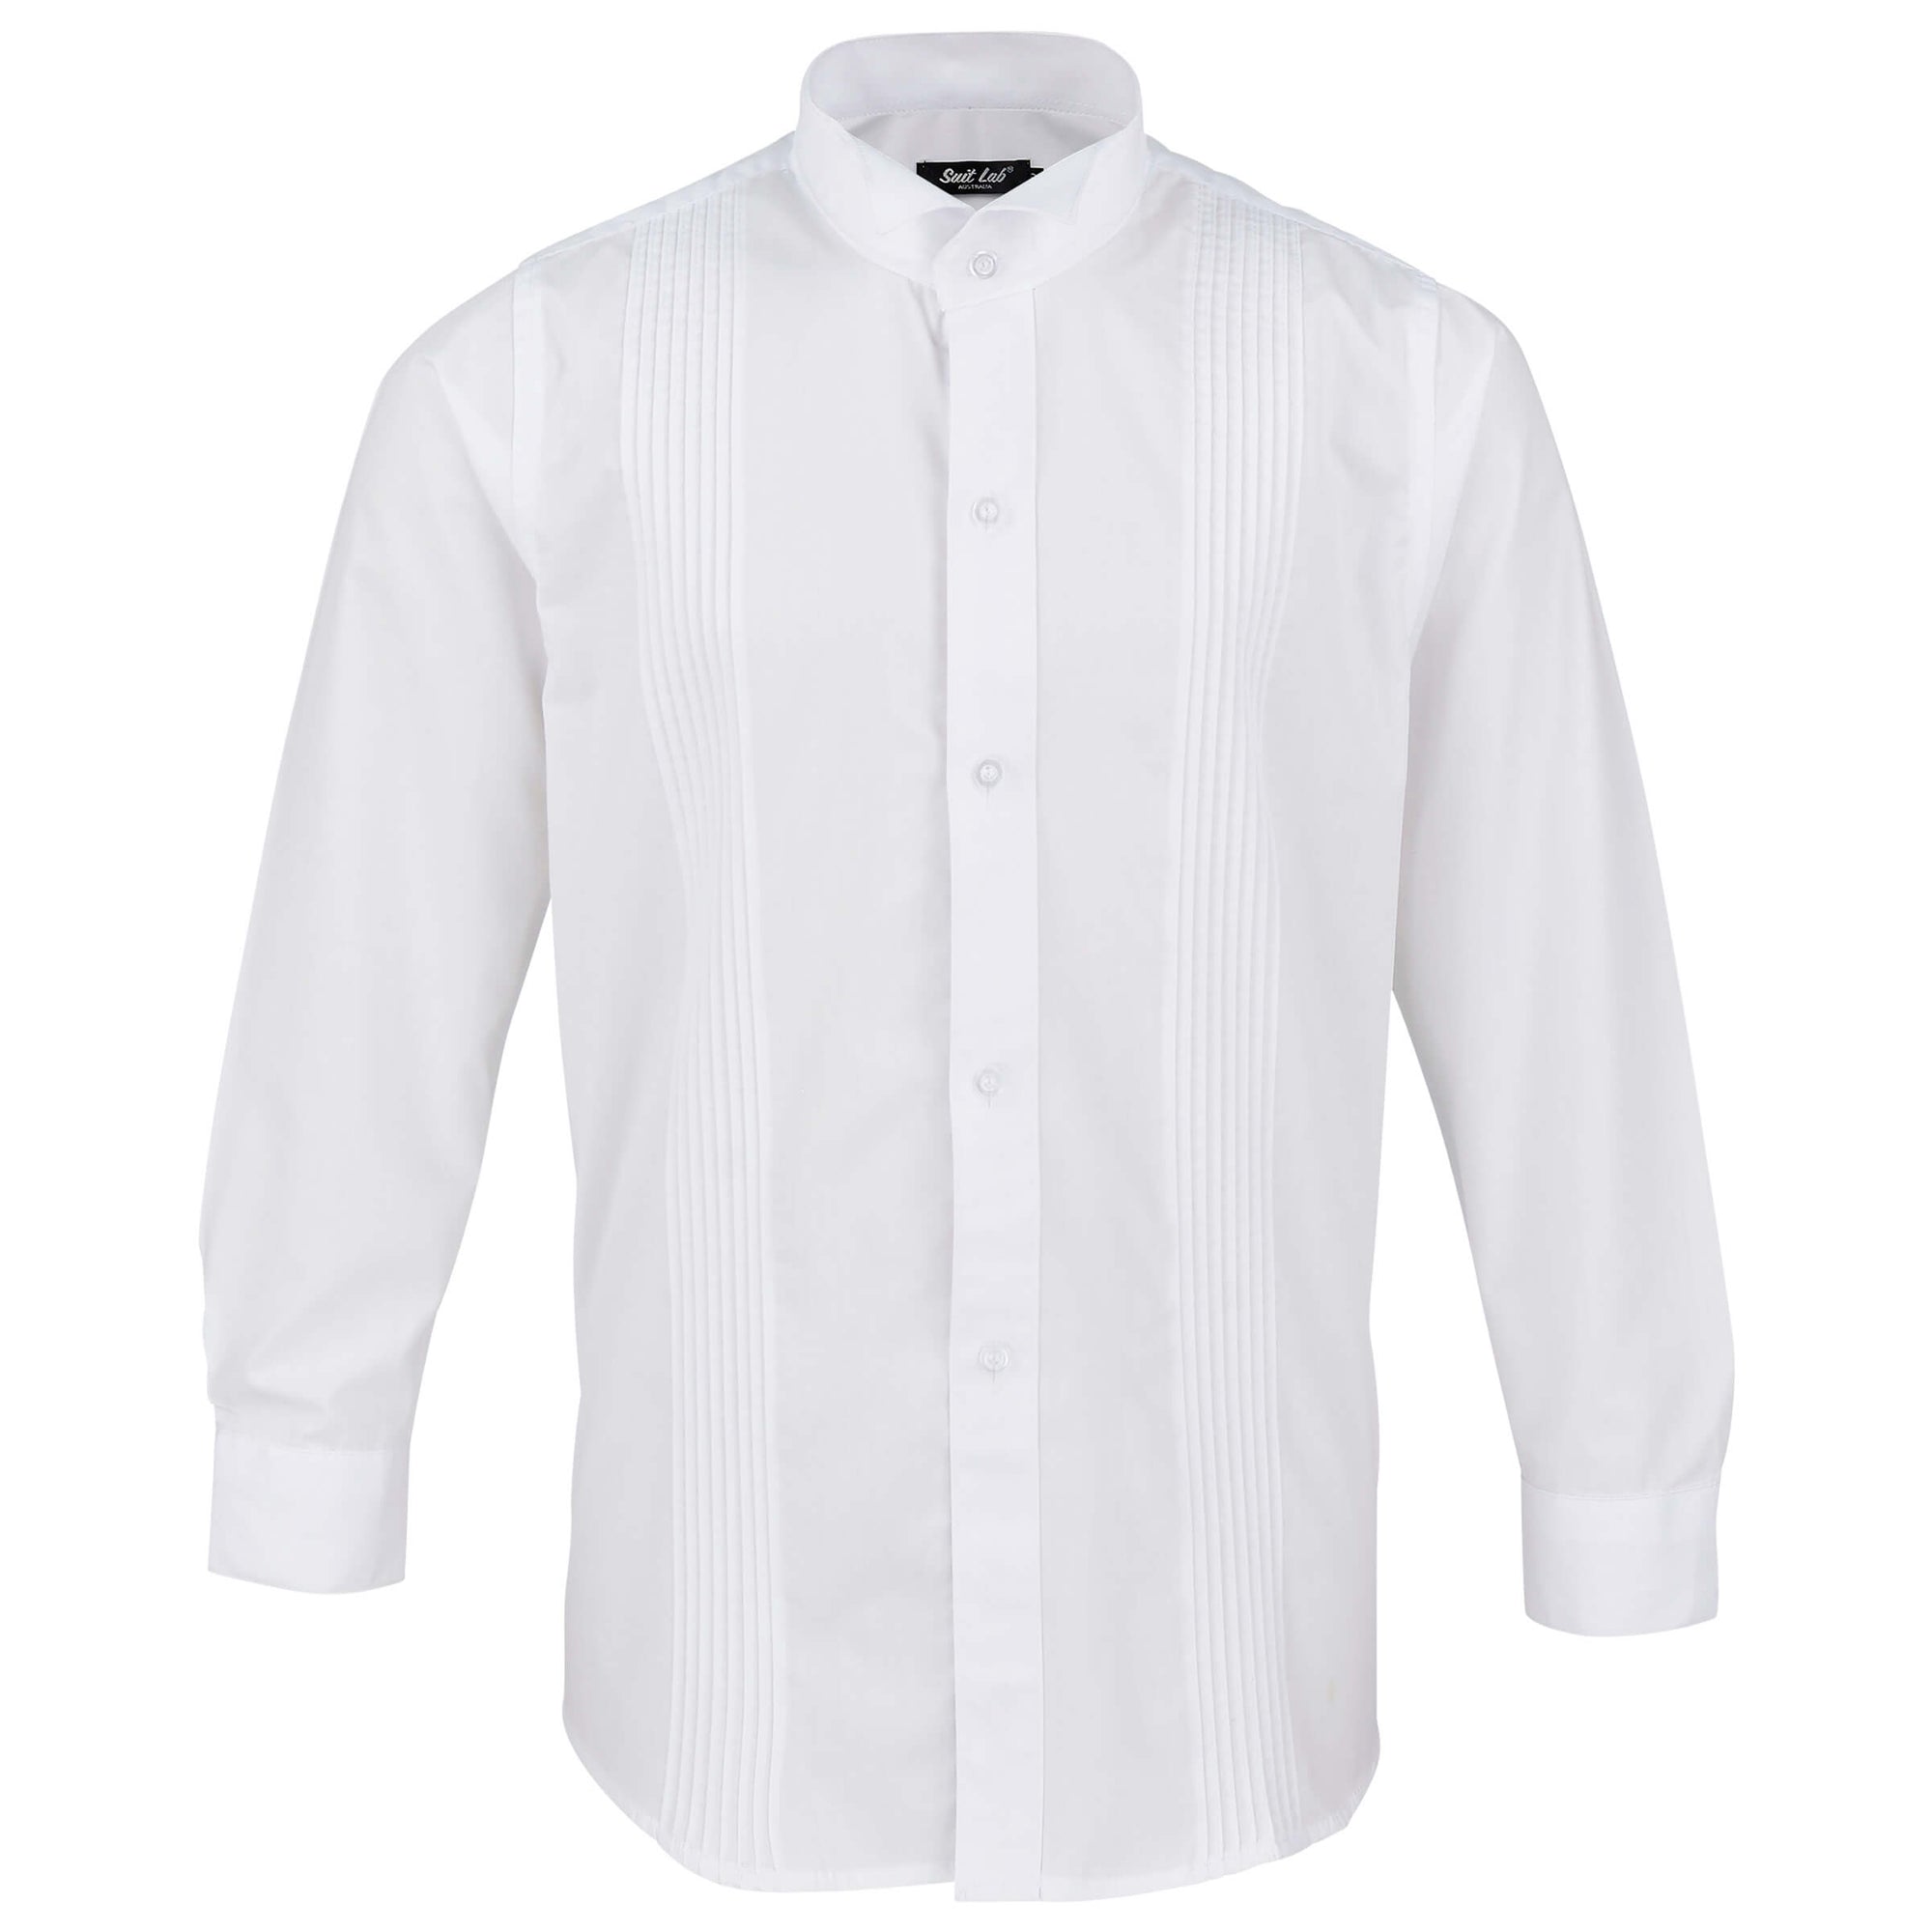 Boys White Wing Tip Formal Shirt with Pleat Detail